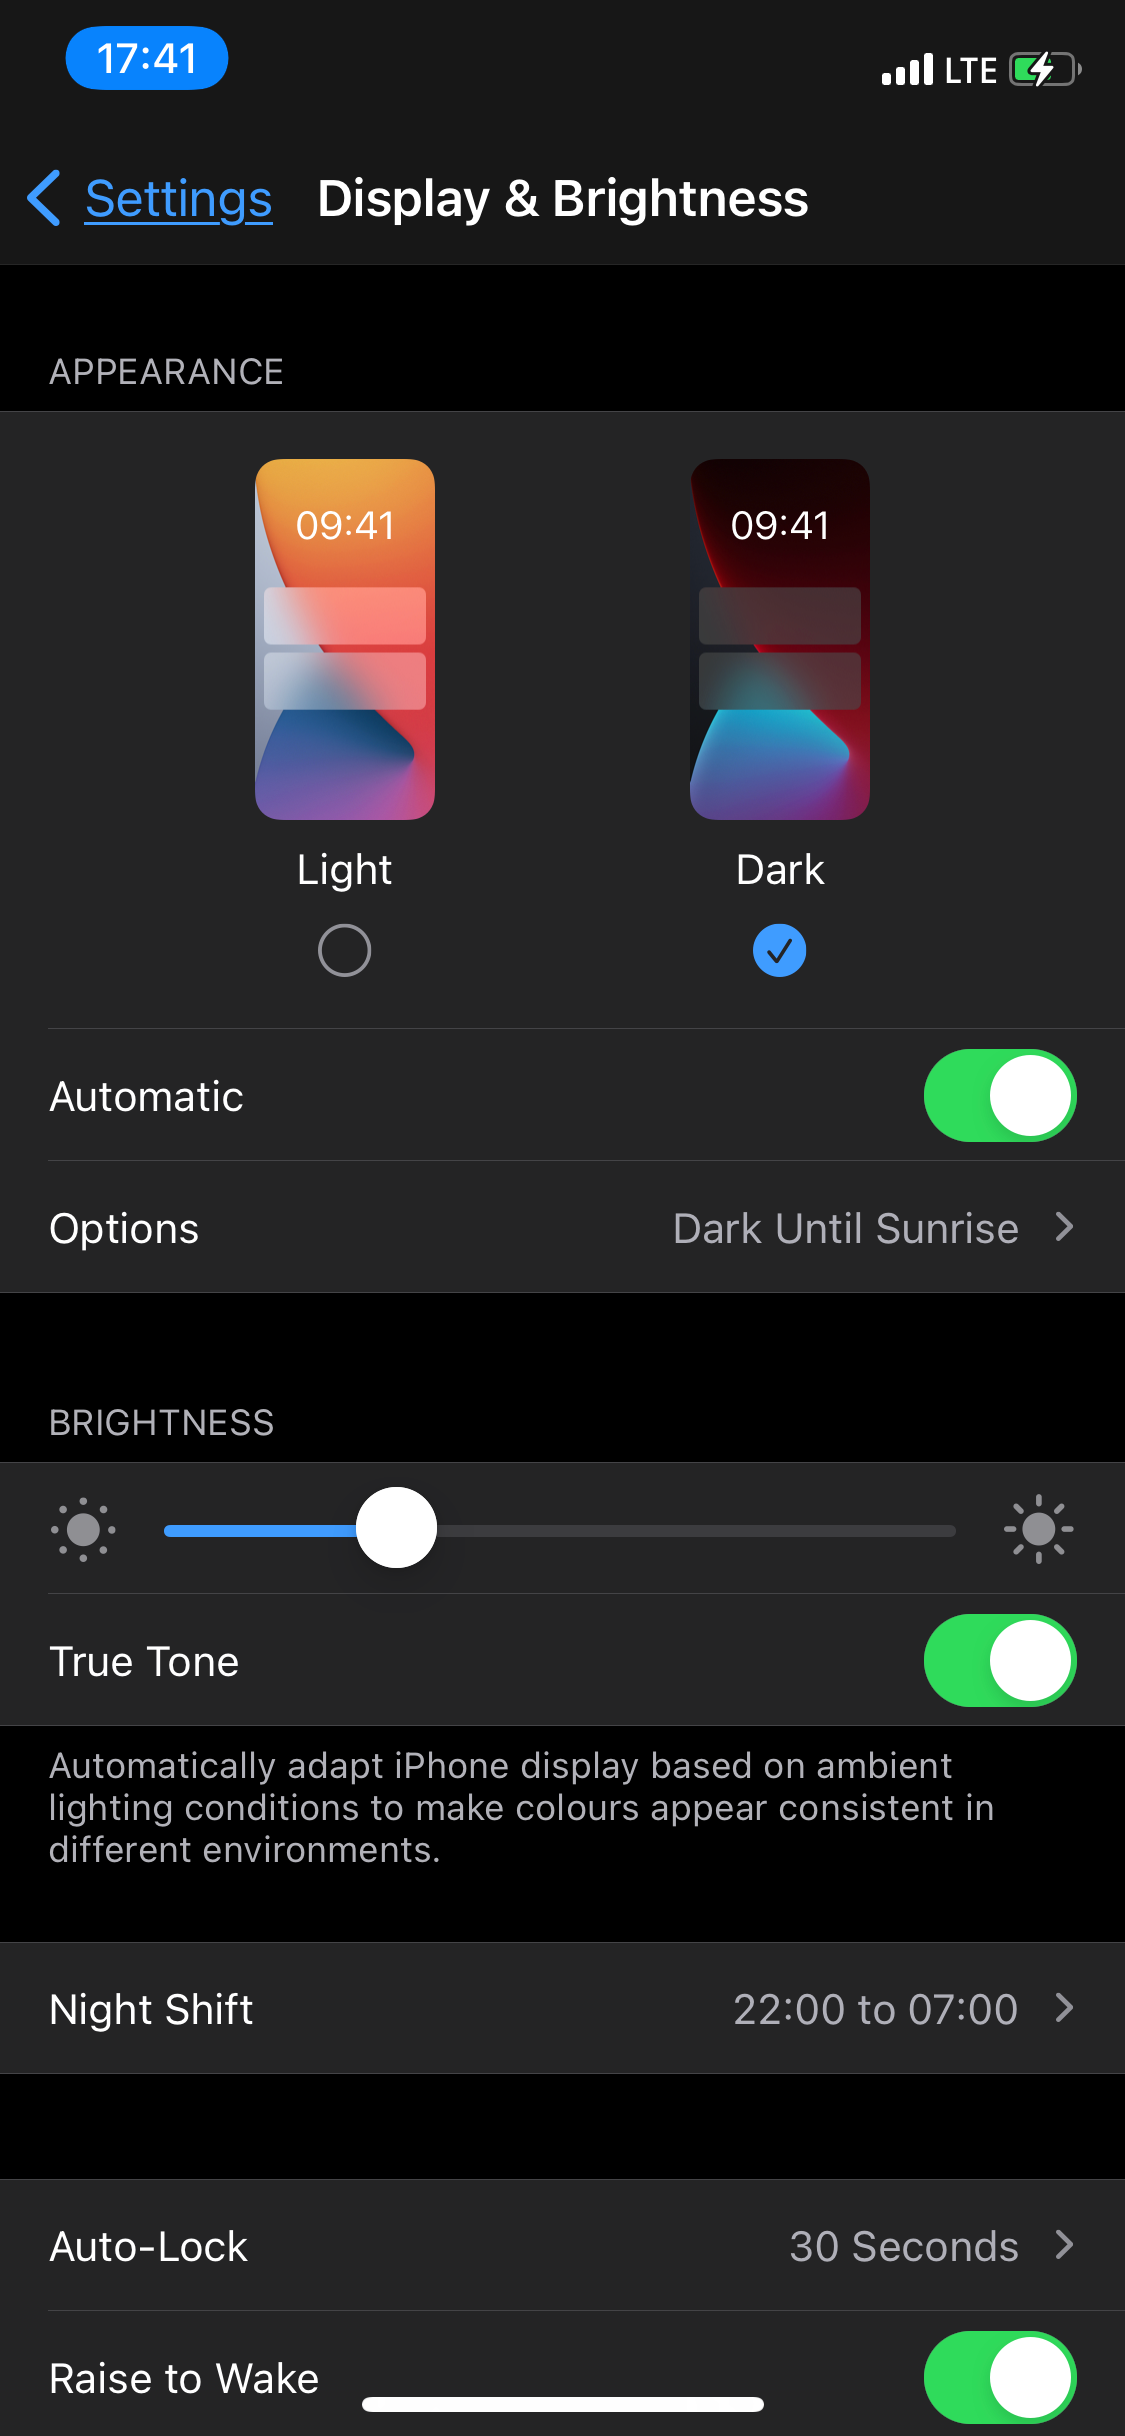 iPhone screenshot showing the Display setting options to switch from Light to Dark mode and vice versa